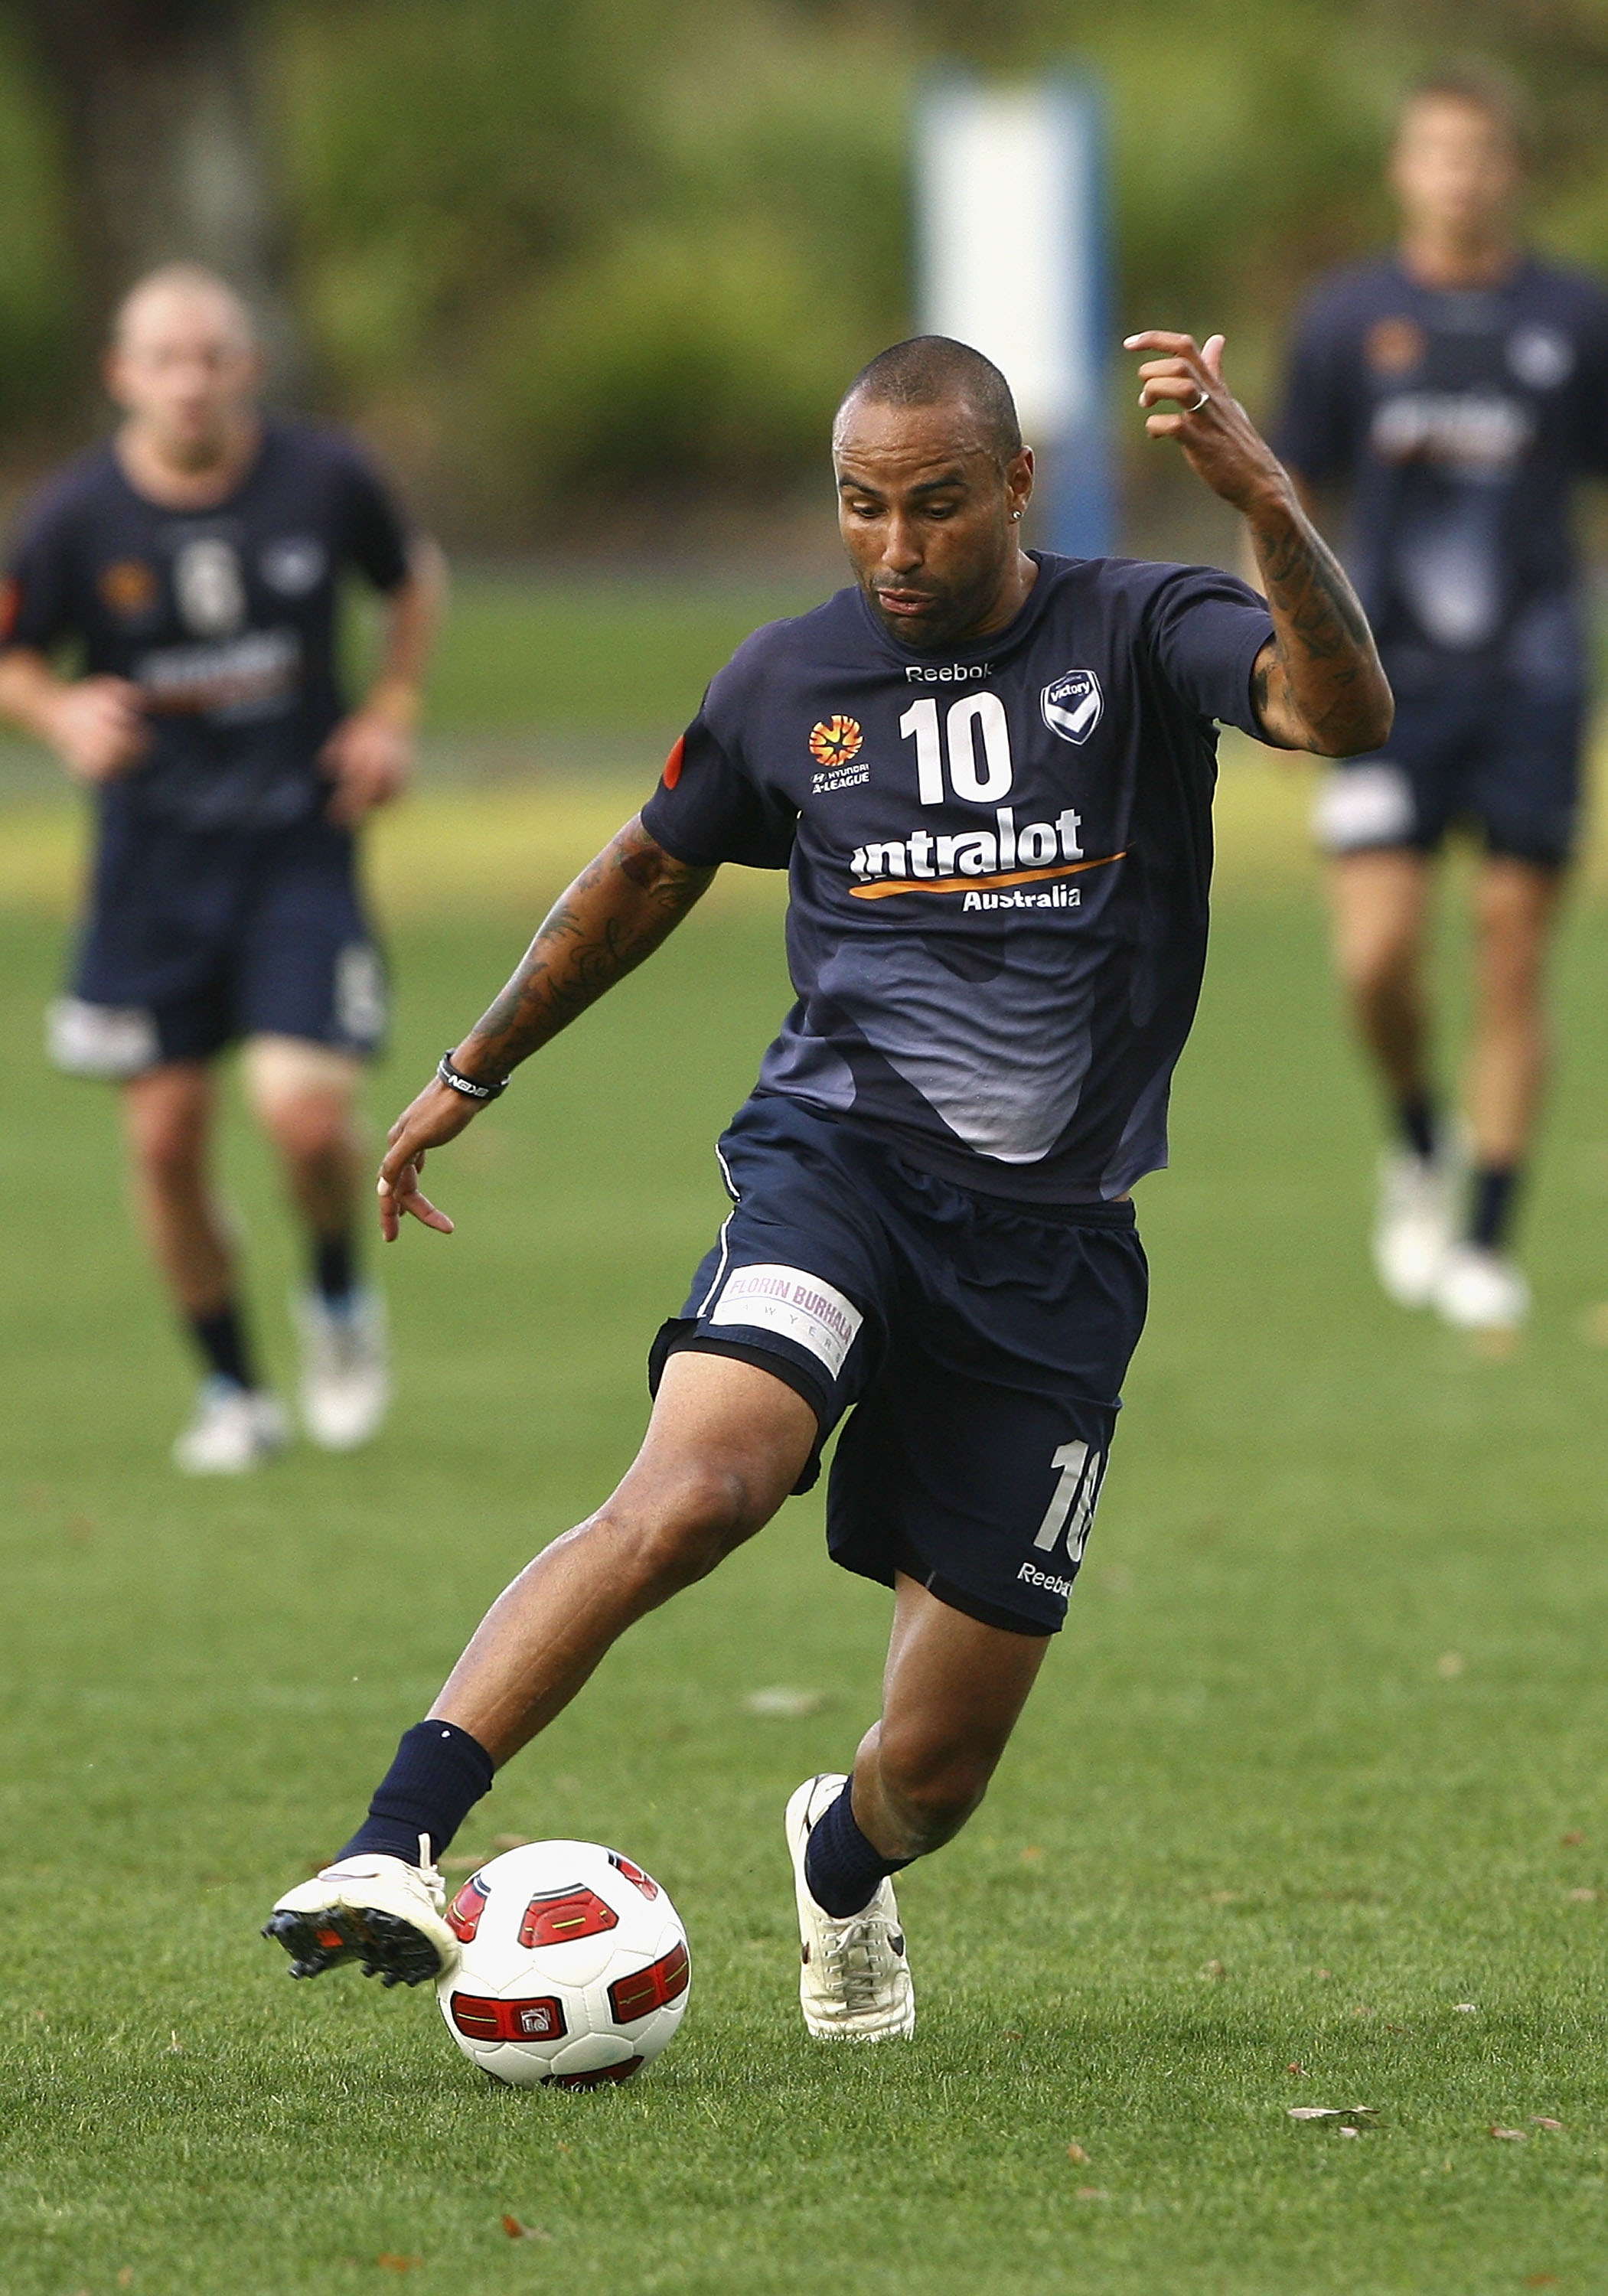 MELBOURNE, AUSTRALIA - APRIL 12:  Archie Thompson controls the ball during a Melbourne Victory Asian Champions League training session at Gosch's Paddock on April 12, 2011 in Melbourne, Australia.  (Photo by Robert Prezioso/Getty Images)